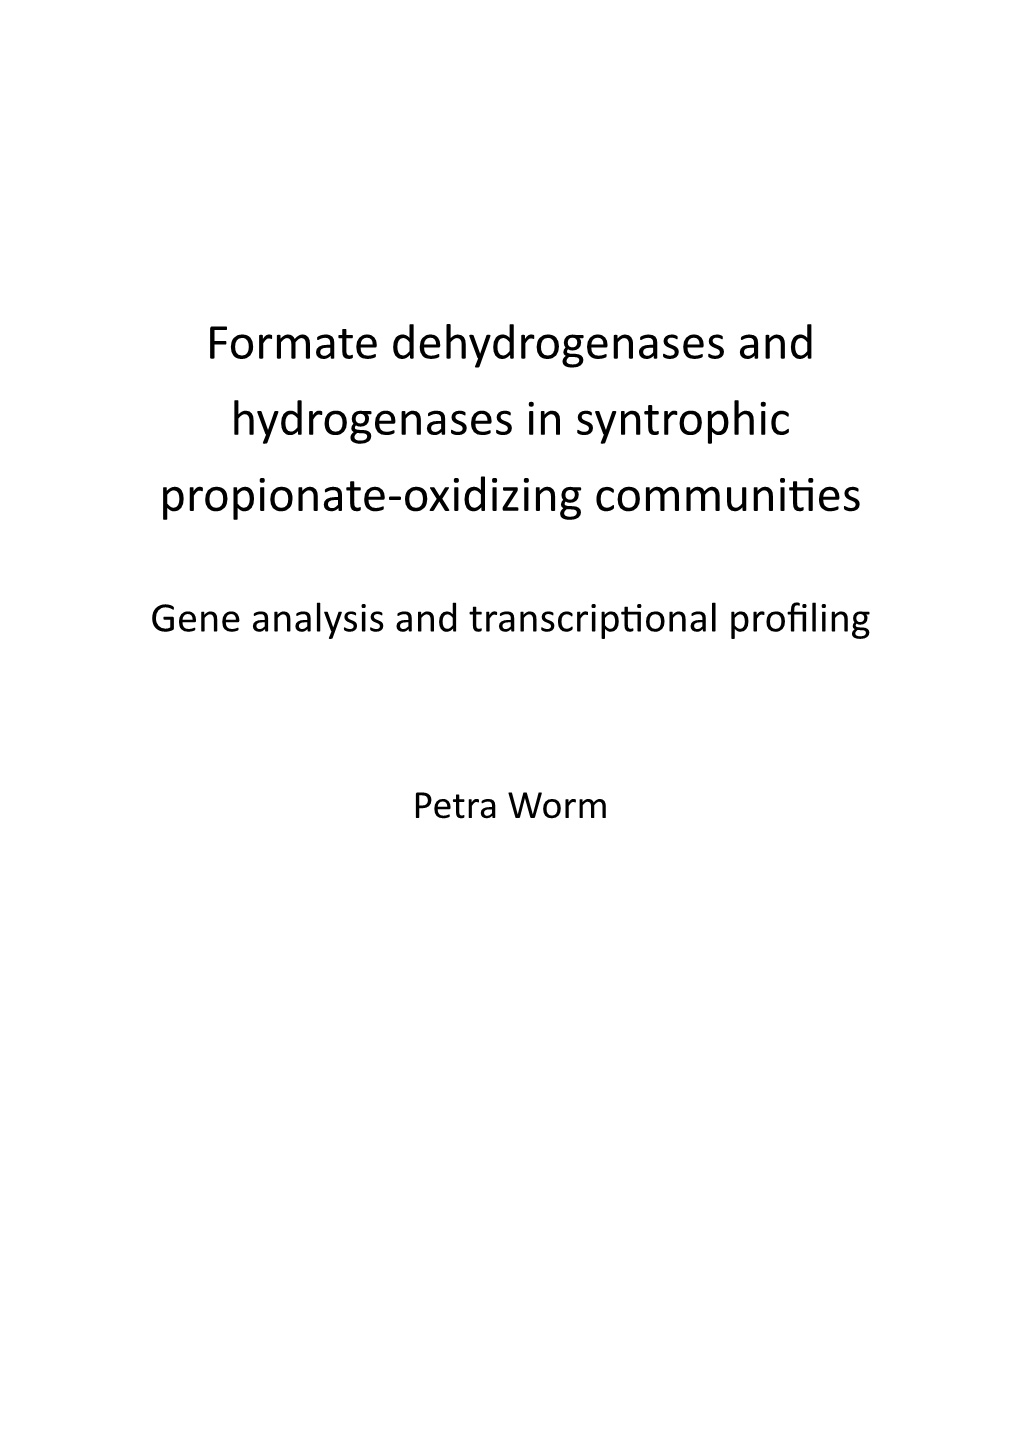 Formate Dehydrogenases and Hydrogenases in Syntrophic Propionate-Oxidizing Communities